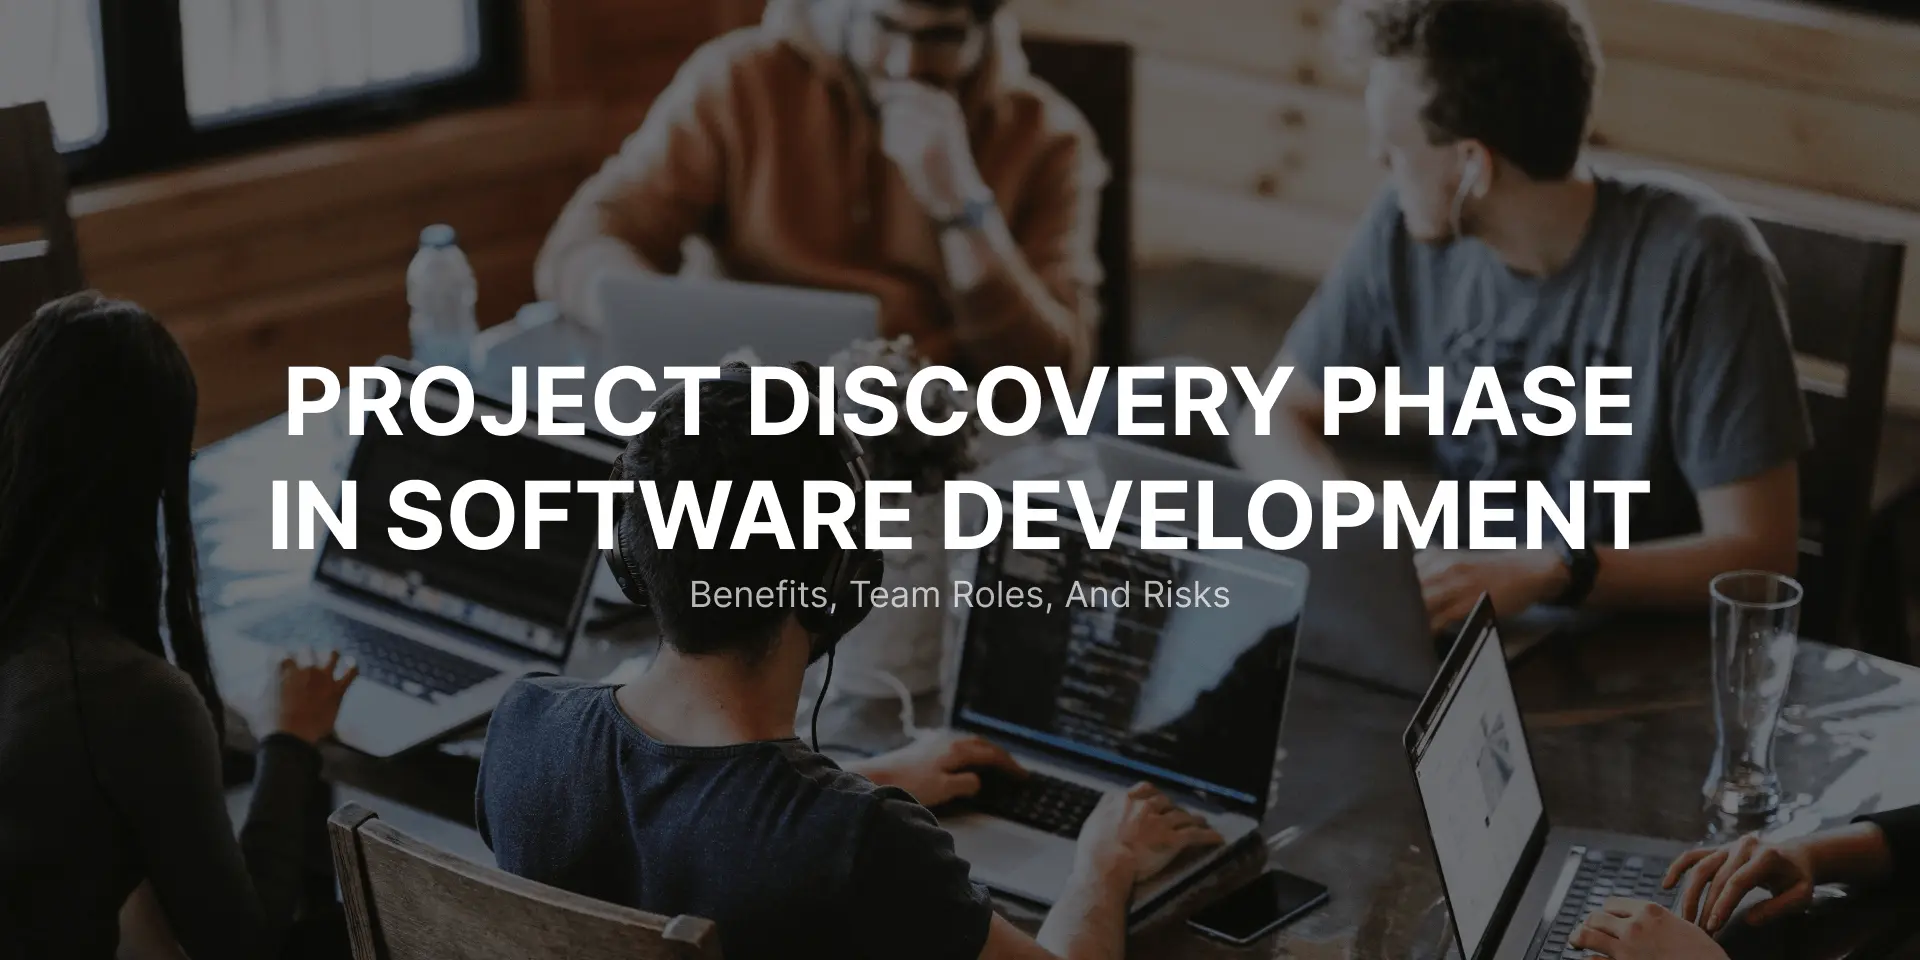 Exploring the Project Discovery Phase: Benefits, Team Roles, and Risks